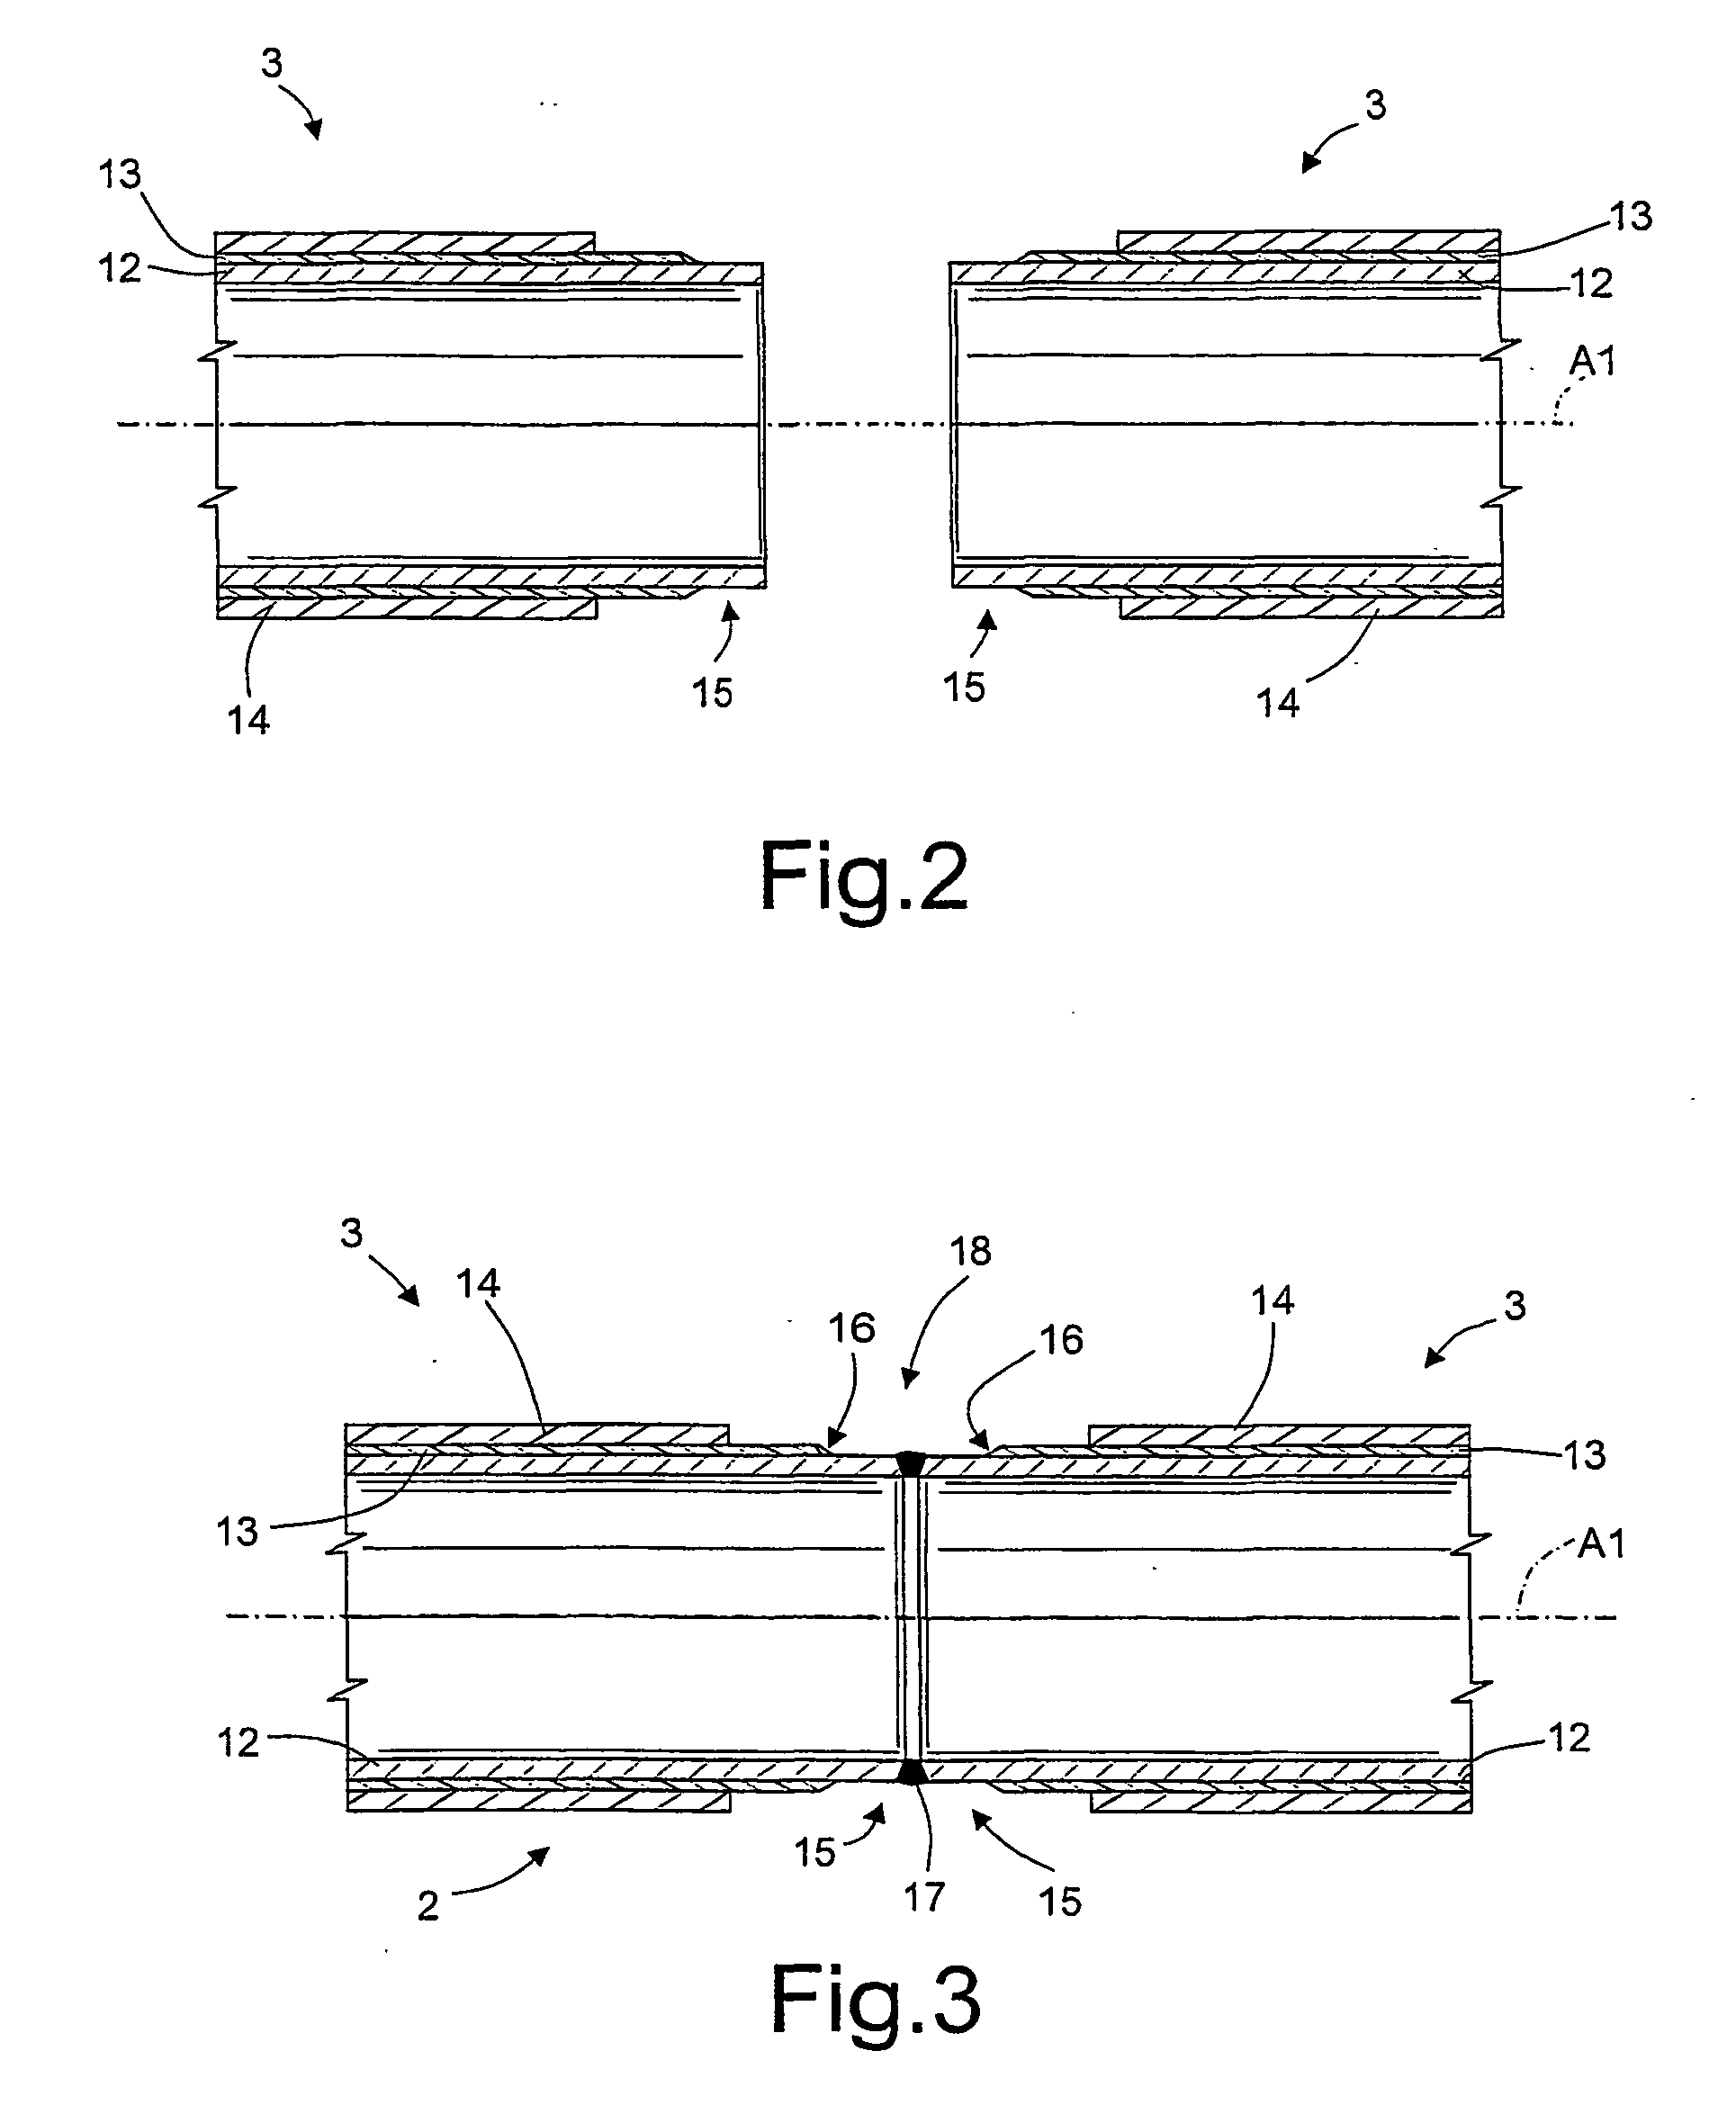 Method for forming a protective coat about a cutback between pipes forming part of an underwater pipeline